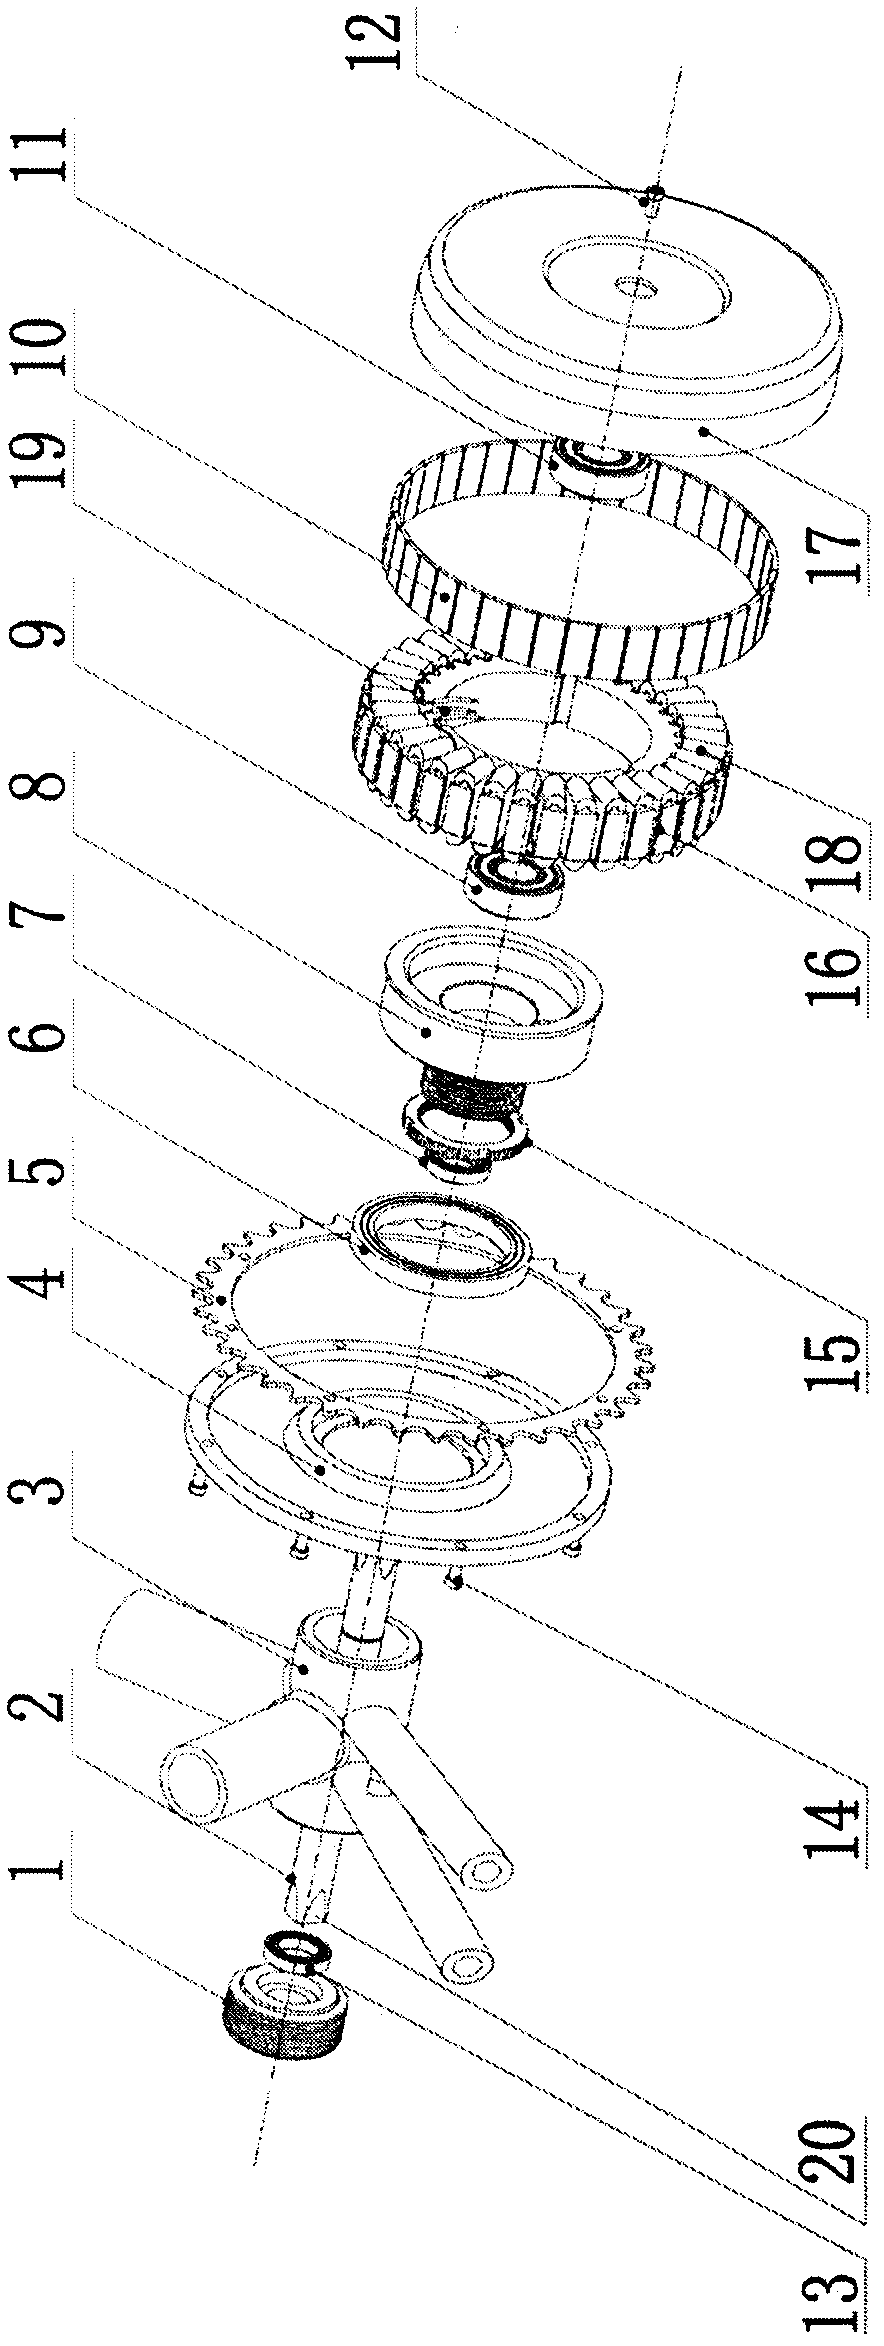 Integrated built-in motor for electric-bicycle motor wheel disc